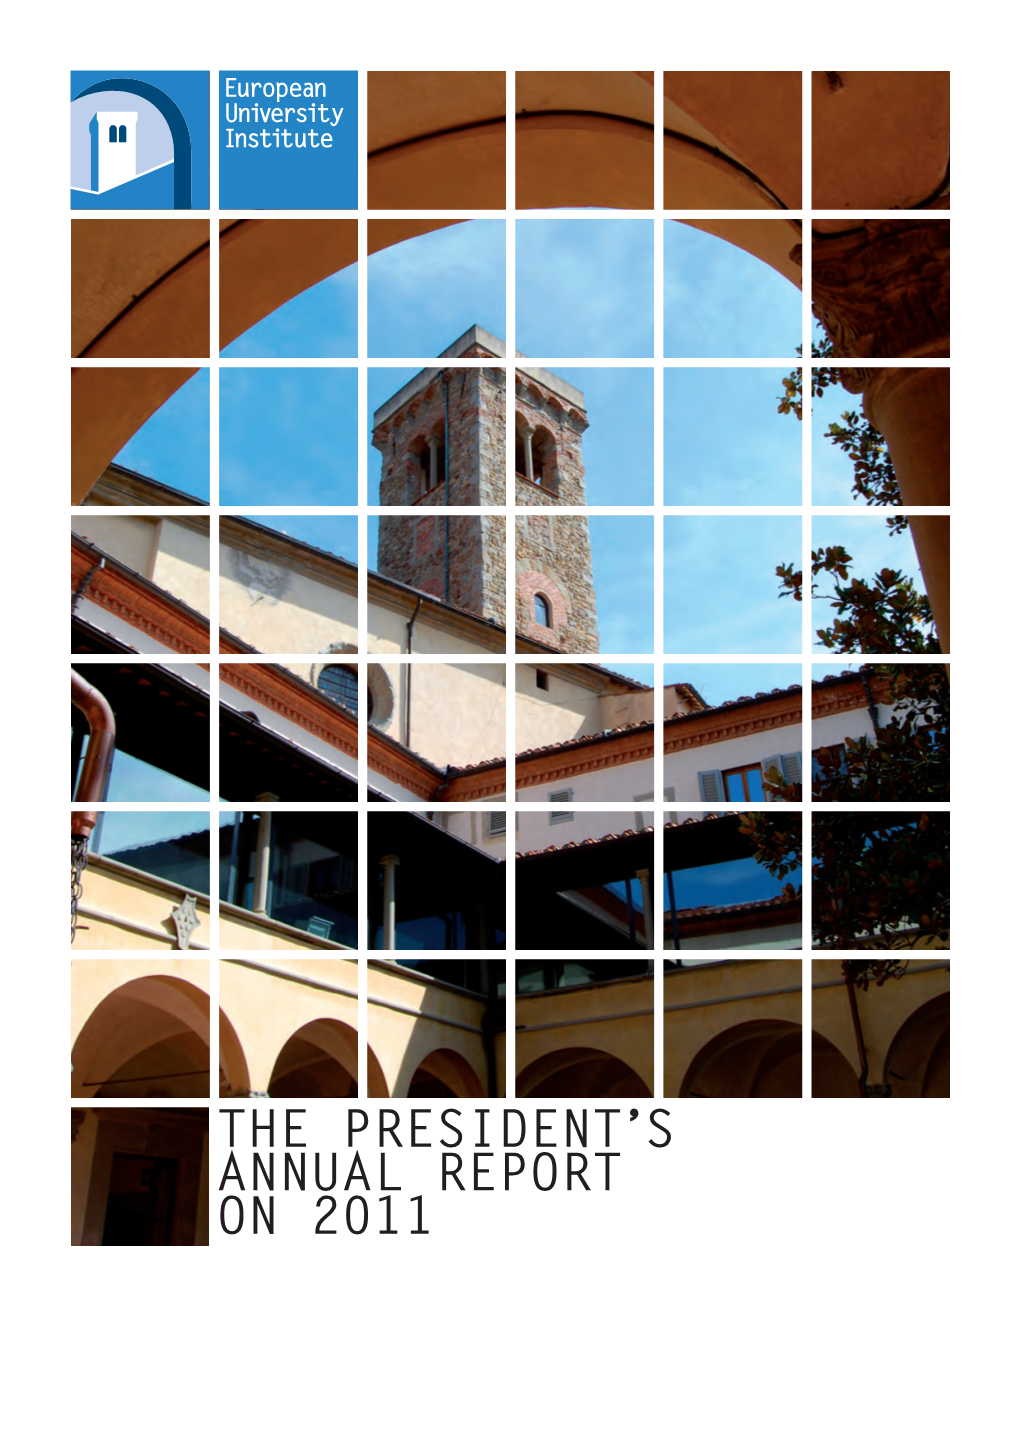 The President's Annual Report on 2011